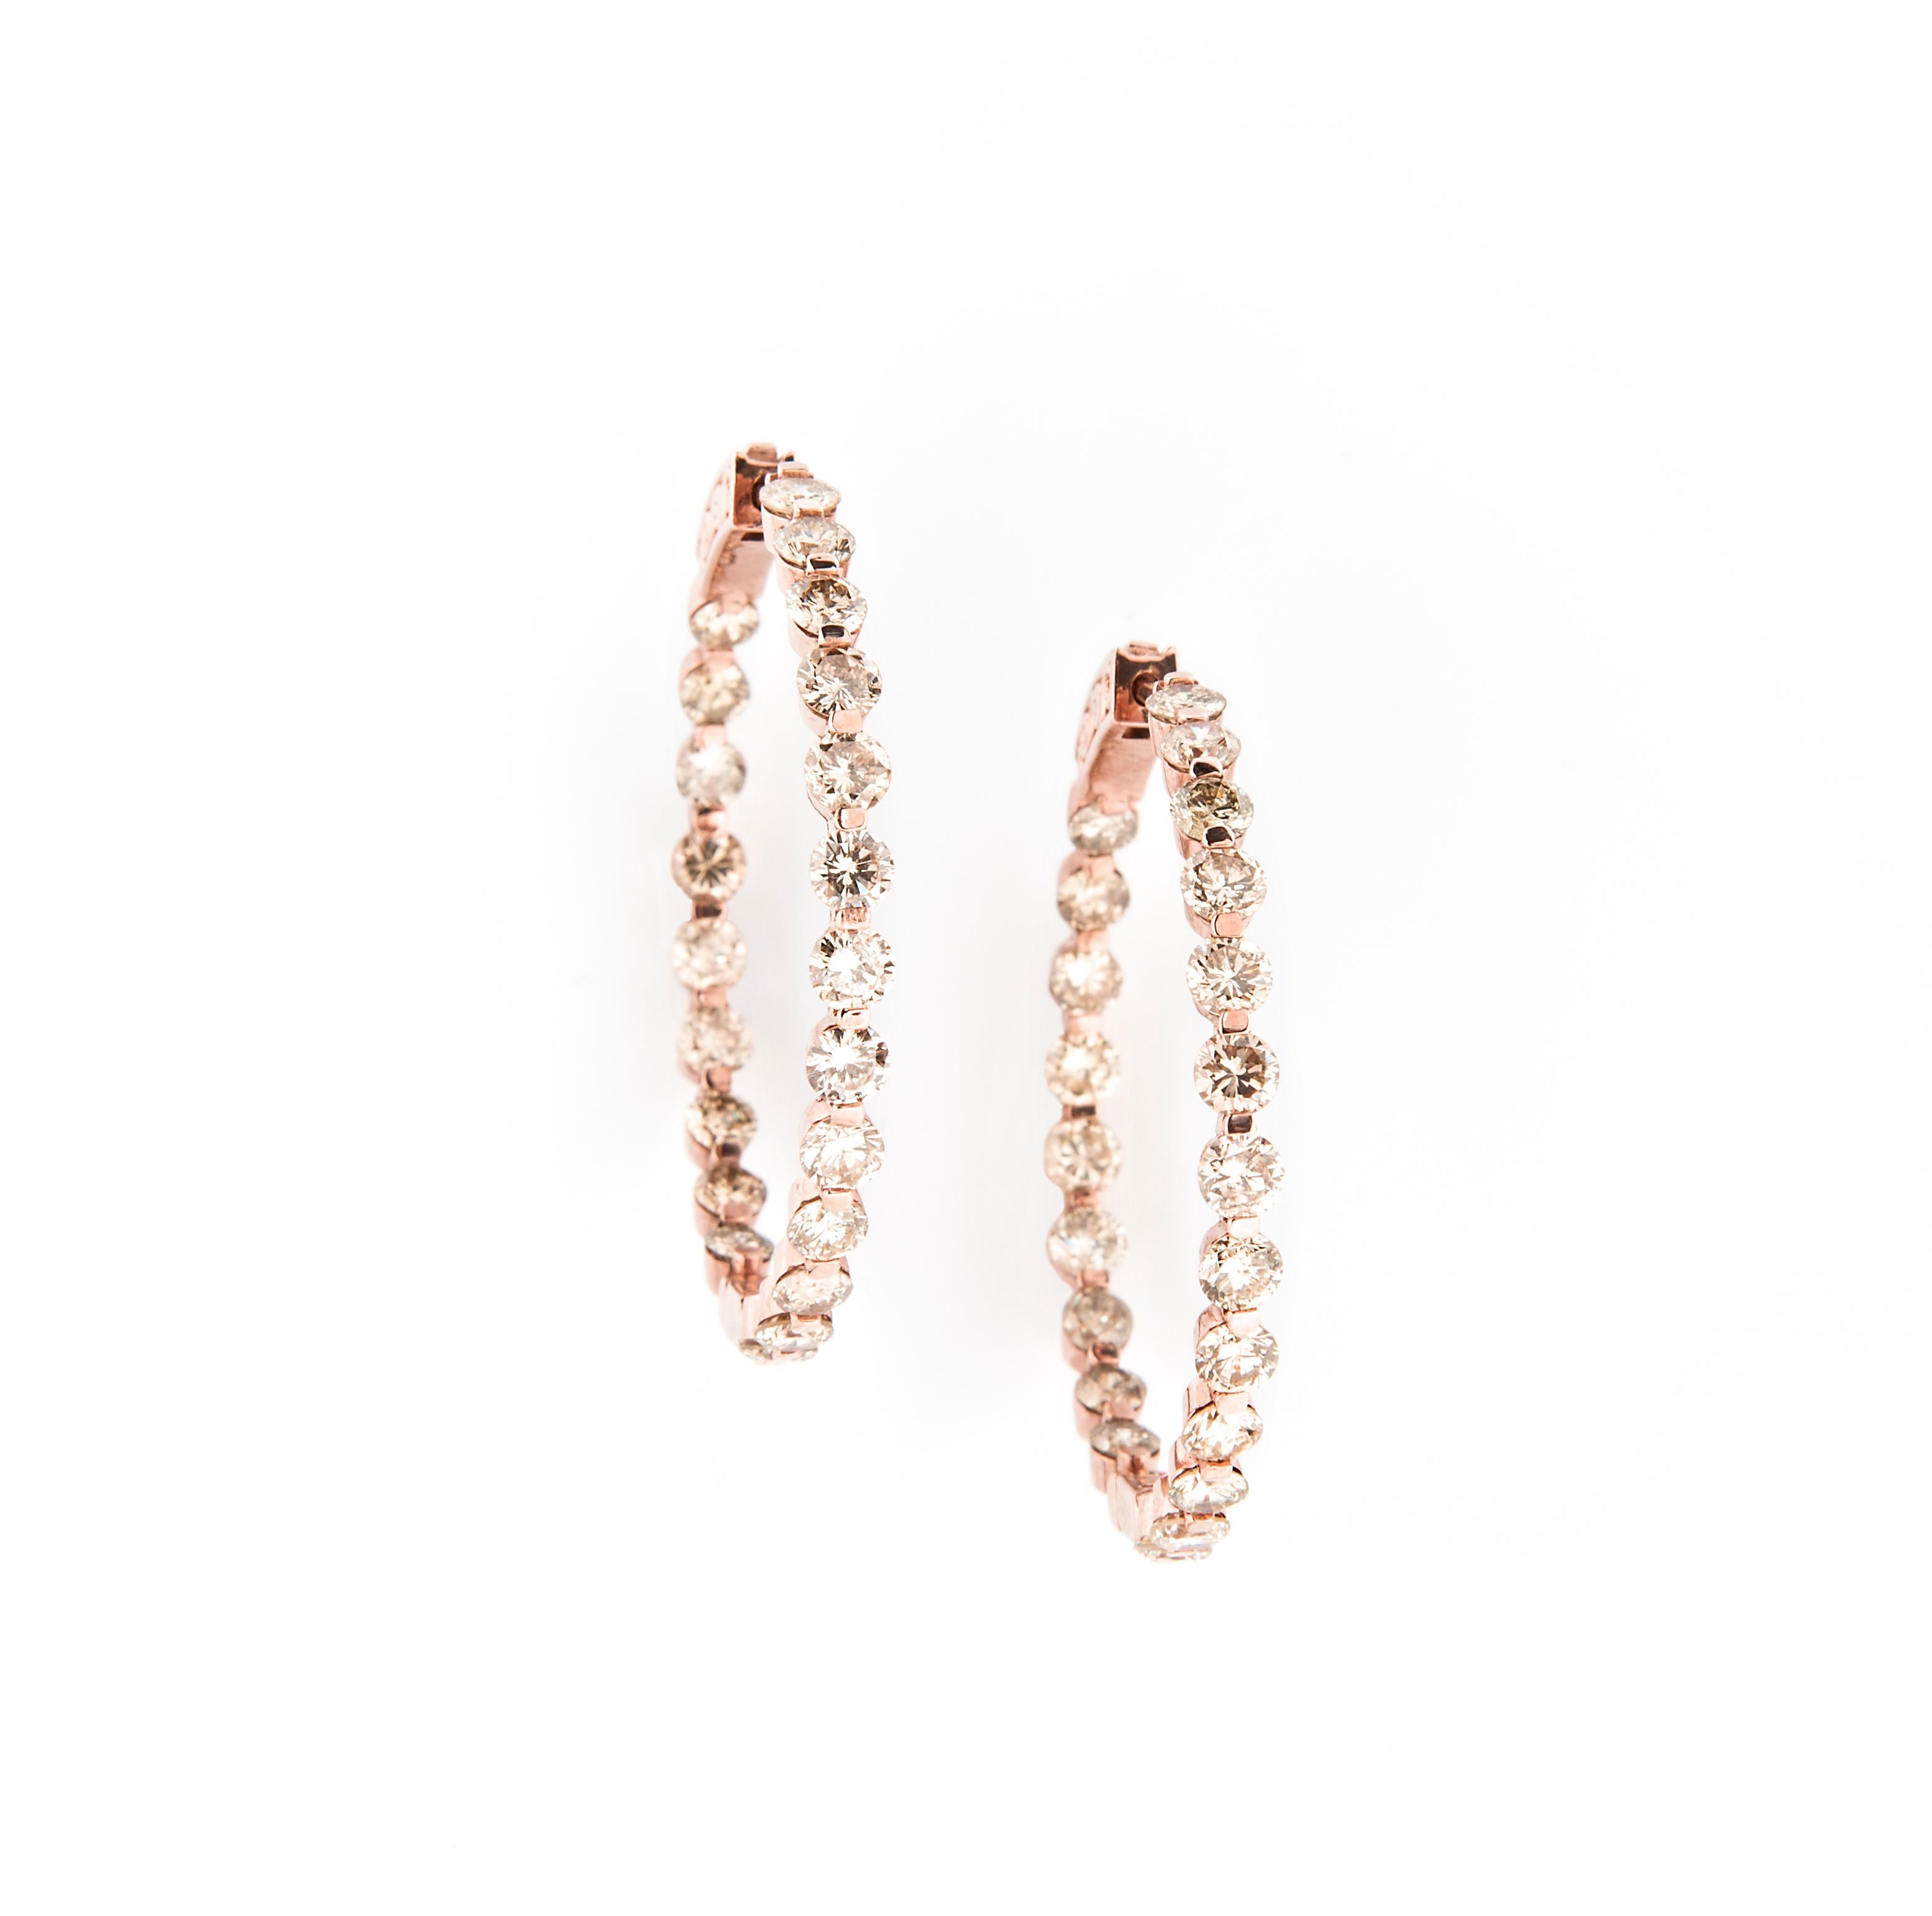 Approximately 8 carats
Varying hues of brown and light brown diamonds
18k Rose Gold